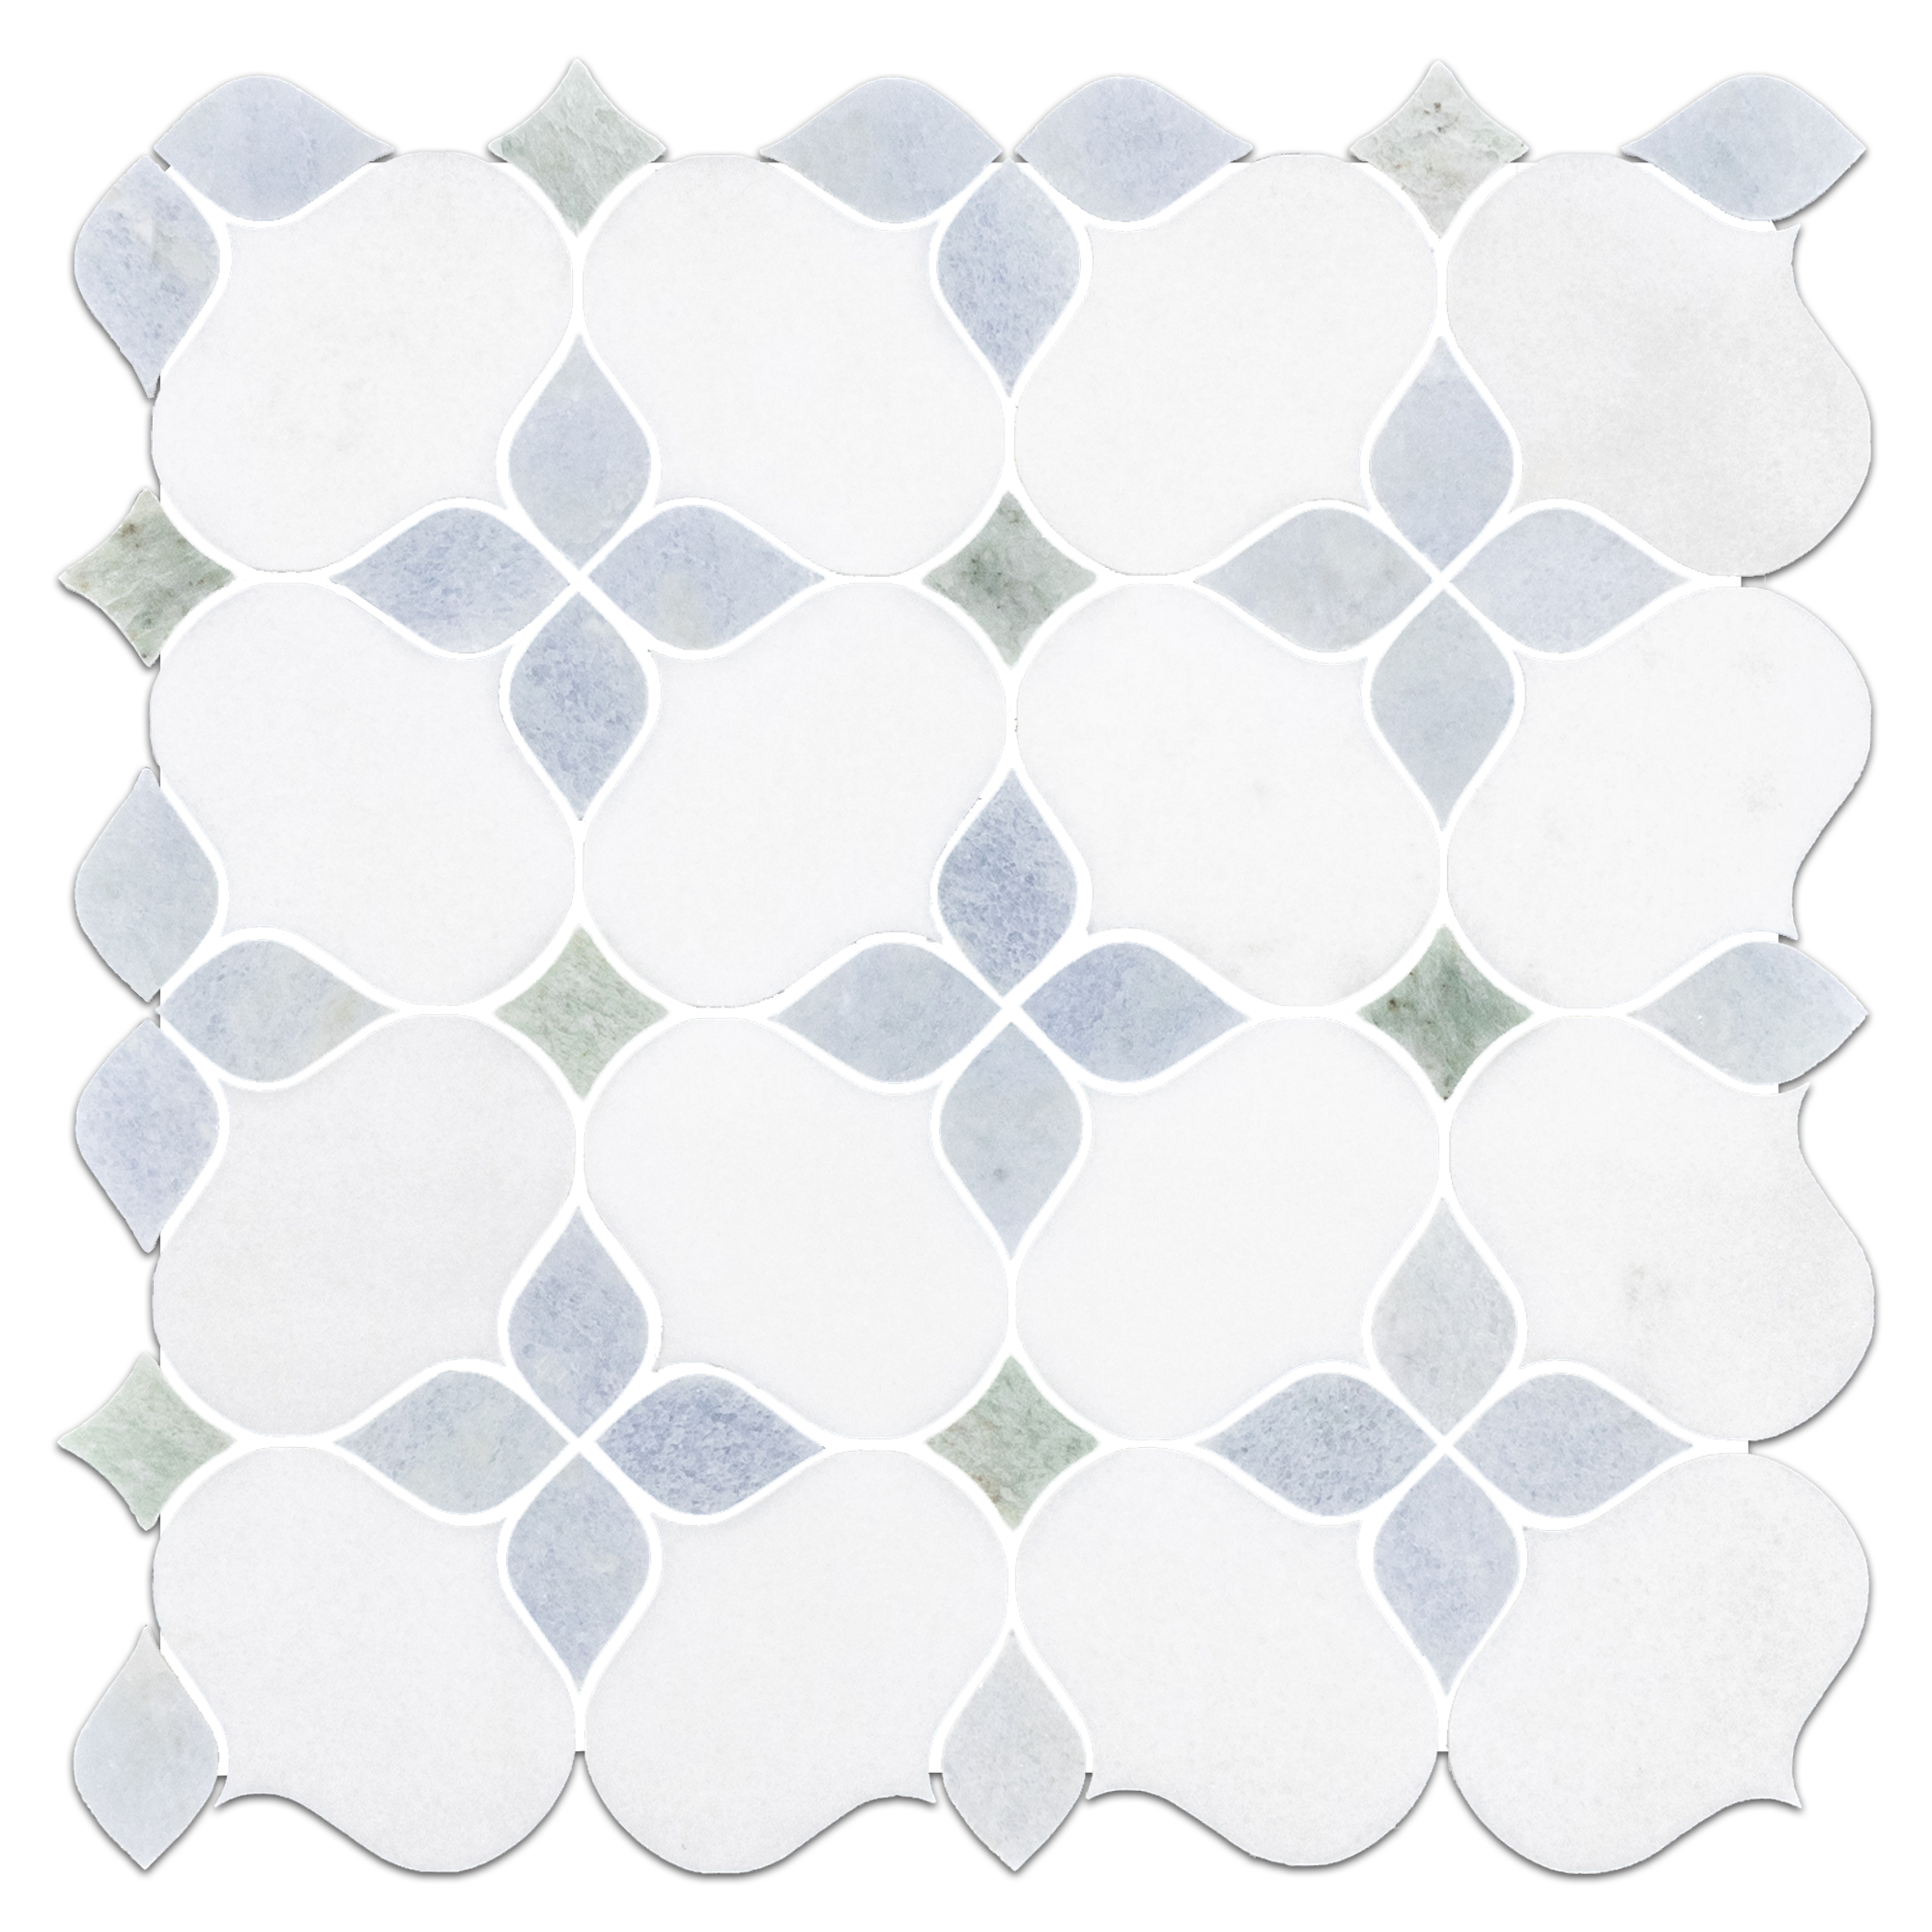 Elon White Thassos Blue Celeste Ming Green Marble Silhouette Field Mosaic 11.6875x11.6875x0.375 Polished - Surface Group International